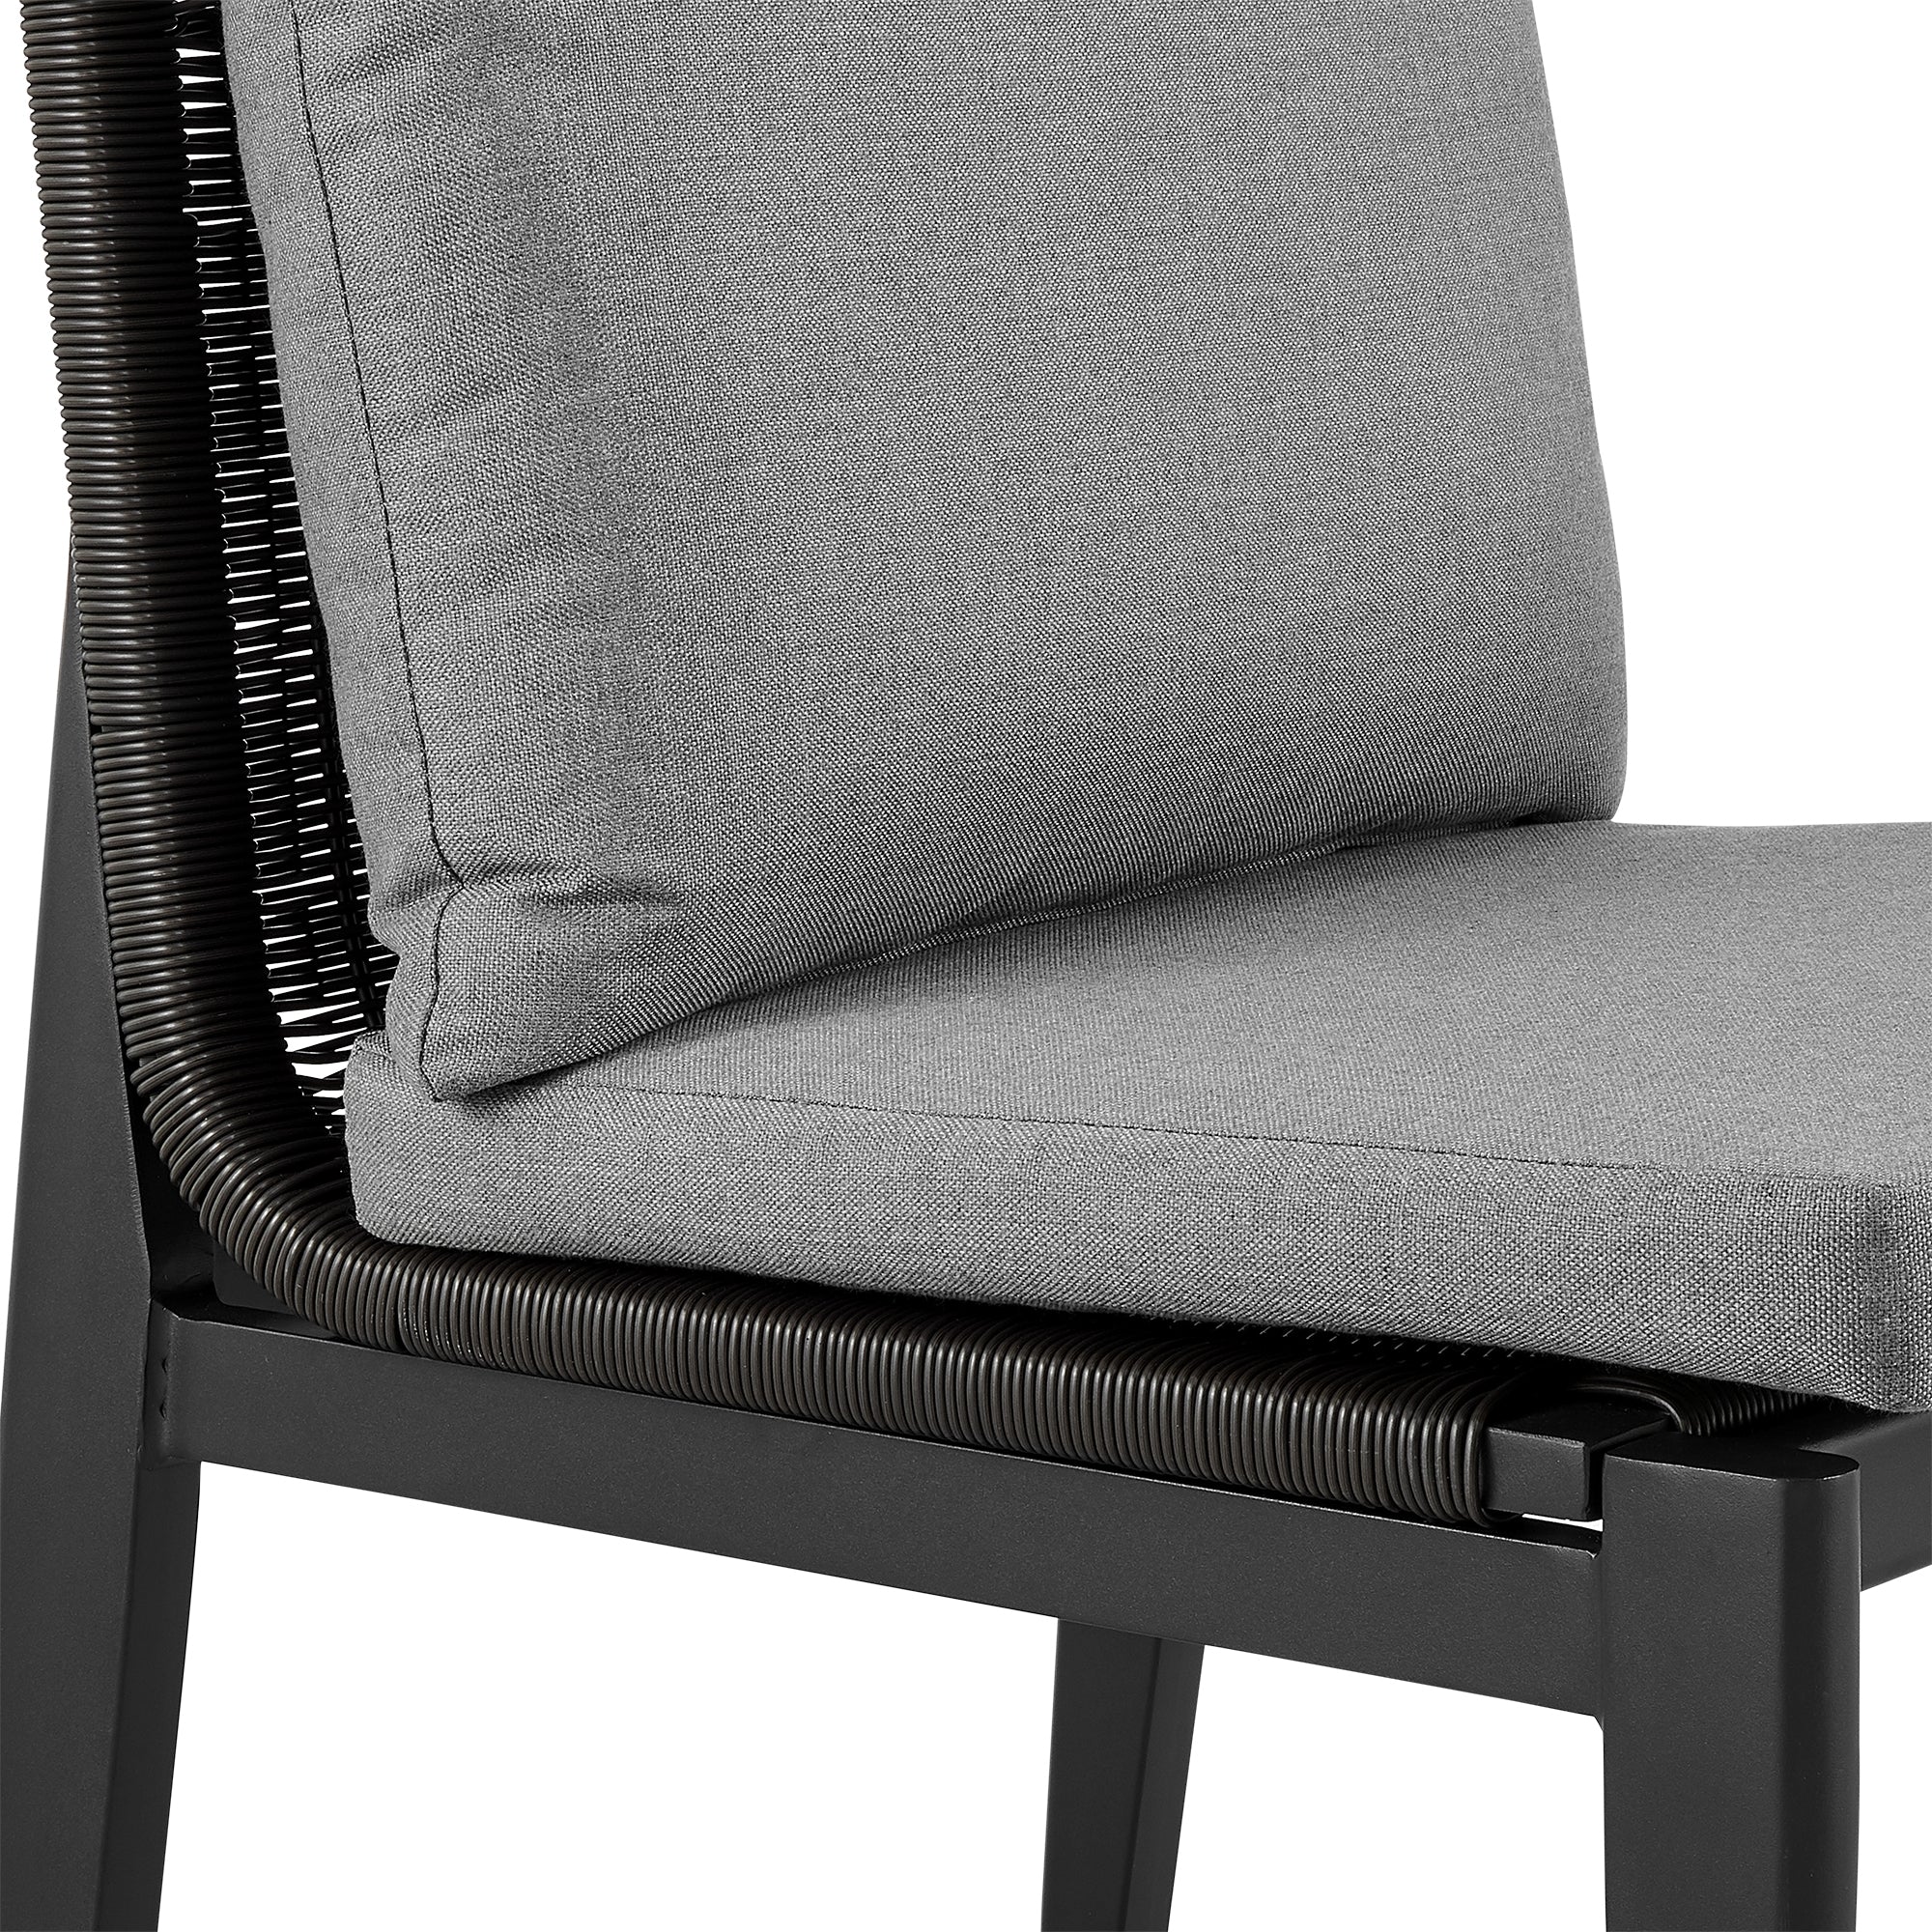 Armen Living - Grand Outdoor Patio Dining Chairs in Aluminum with Grey Cushions - Set of 2 - 840254332720